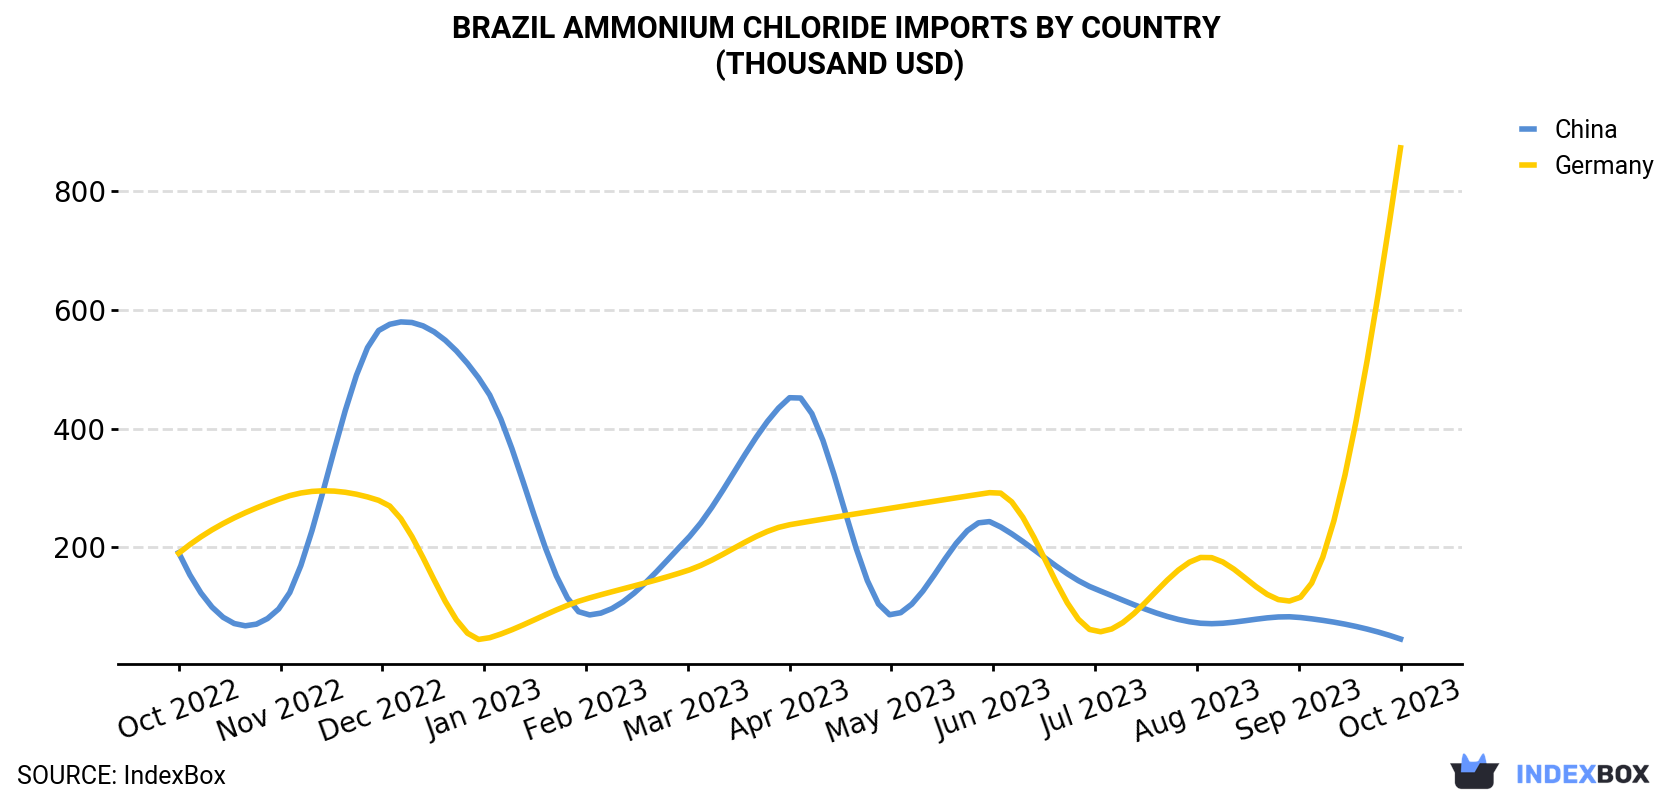 Brazil Ammonium Chloride Imports By Country (Thousand USD)